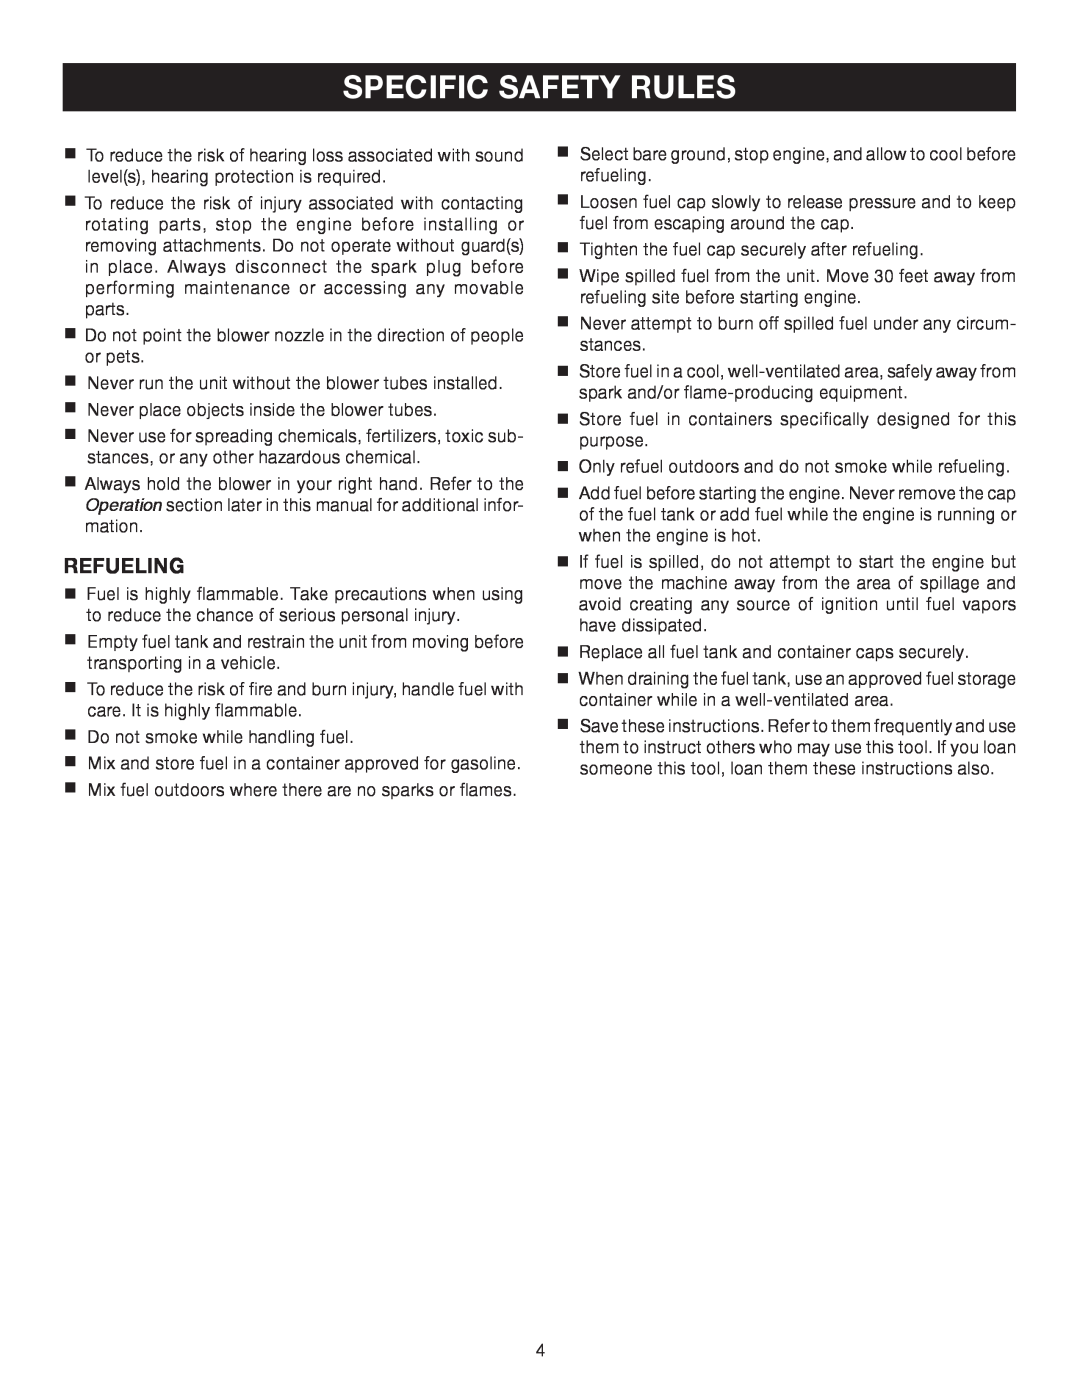 Ryobi RY08576 manual Specific Safety Rules, Refueling 